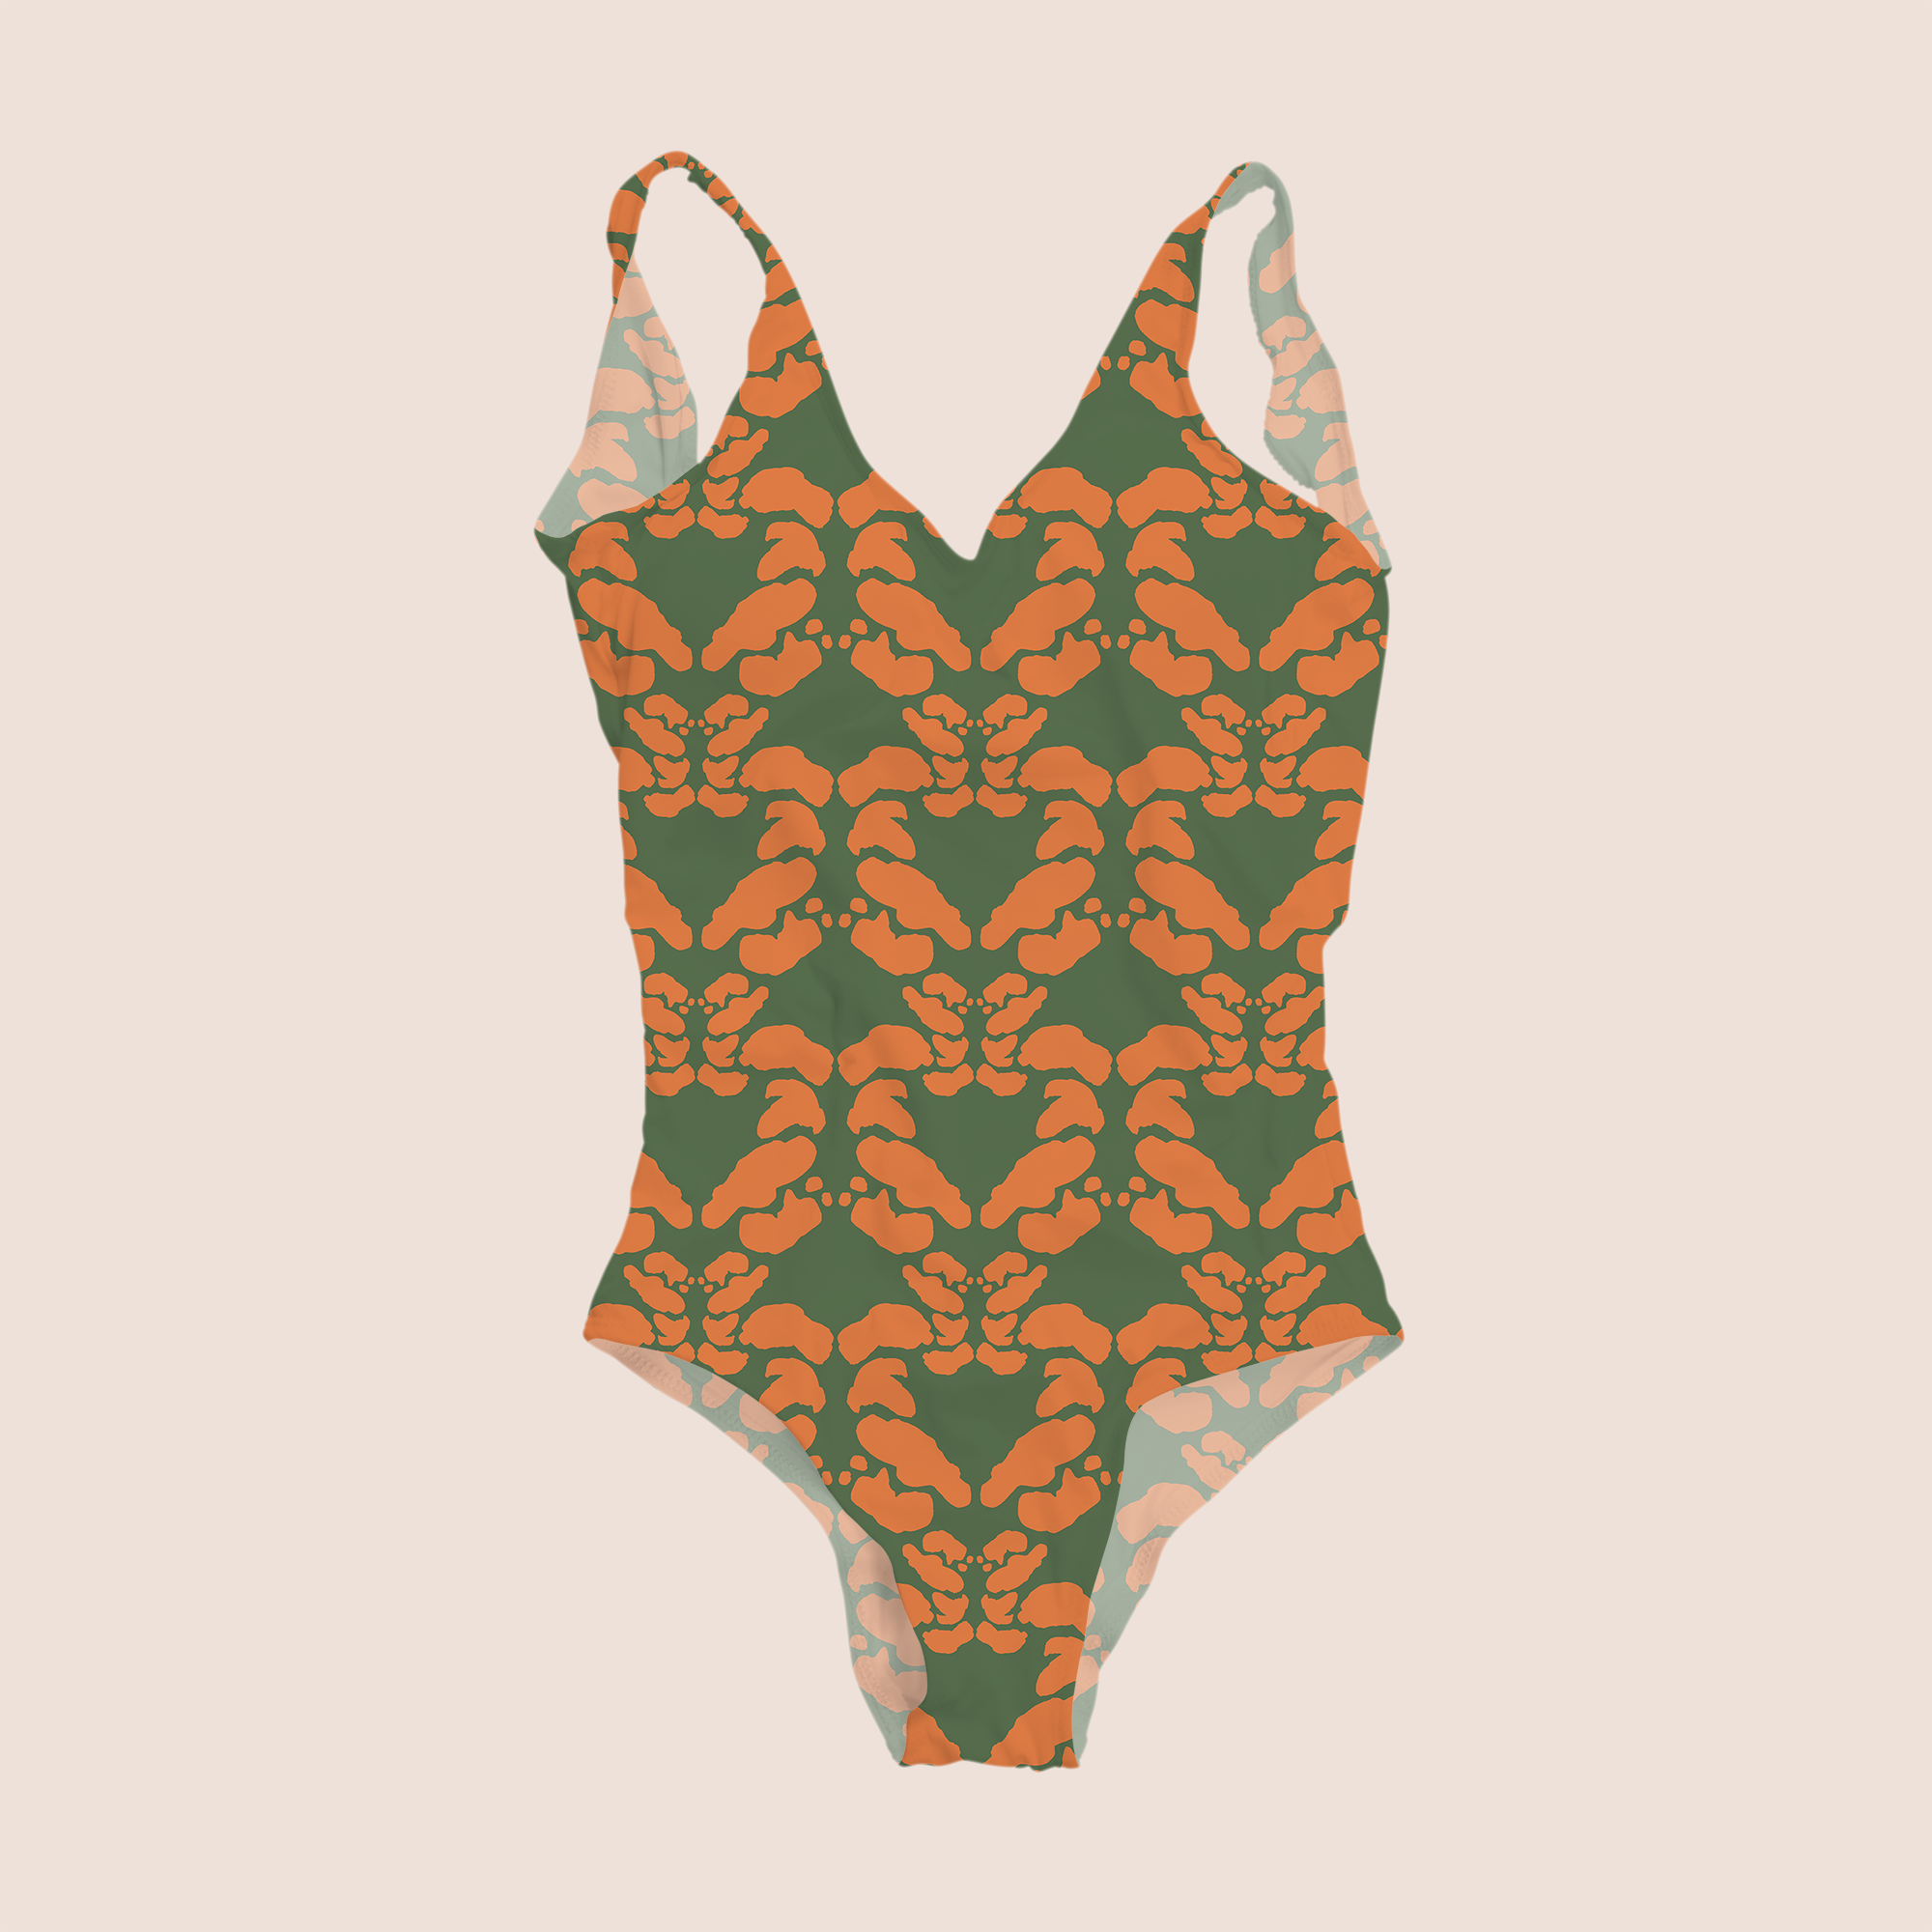 Symmetry decor in orange on green pattern design printed on recycled fabric lycra